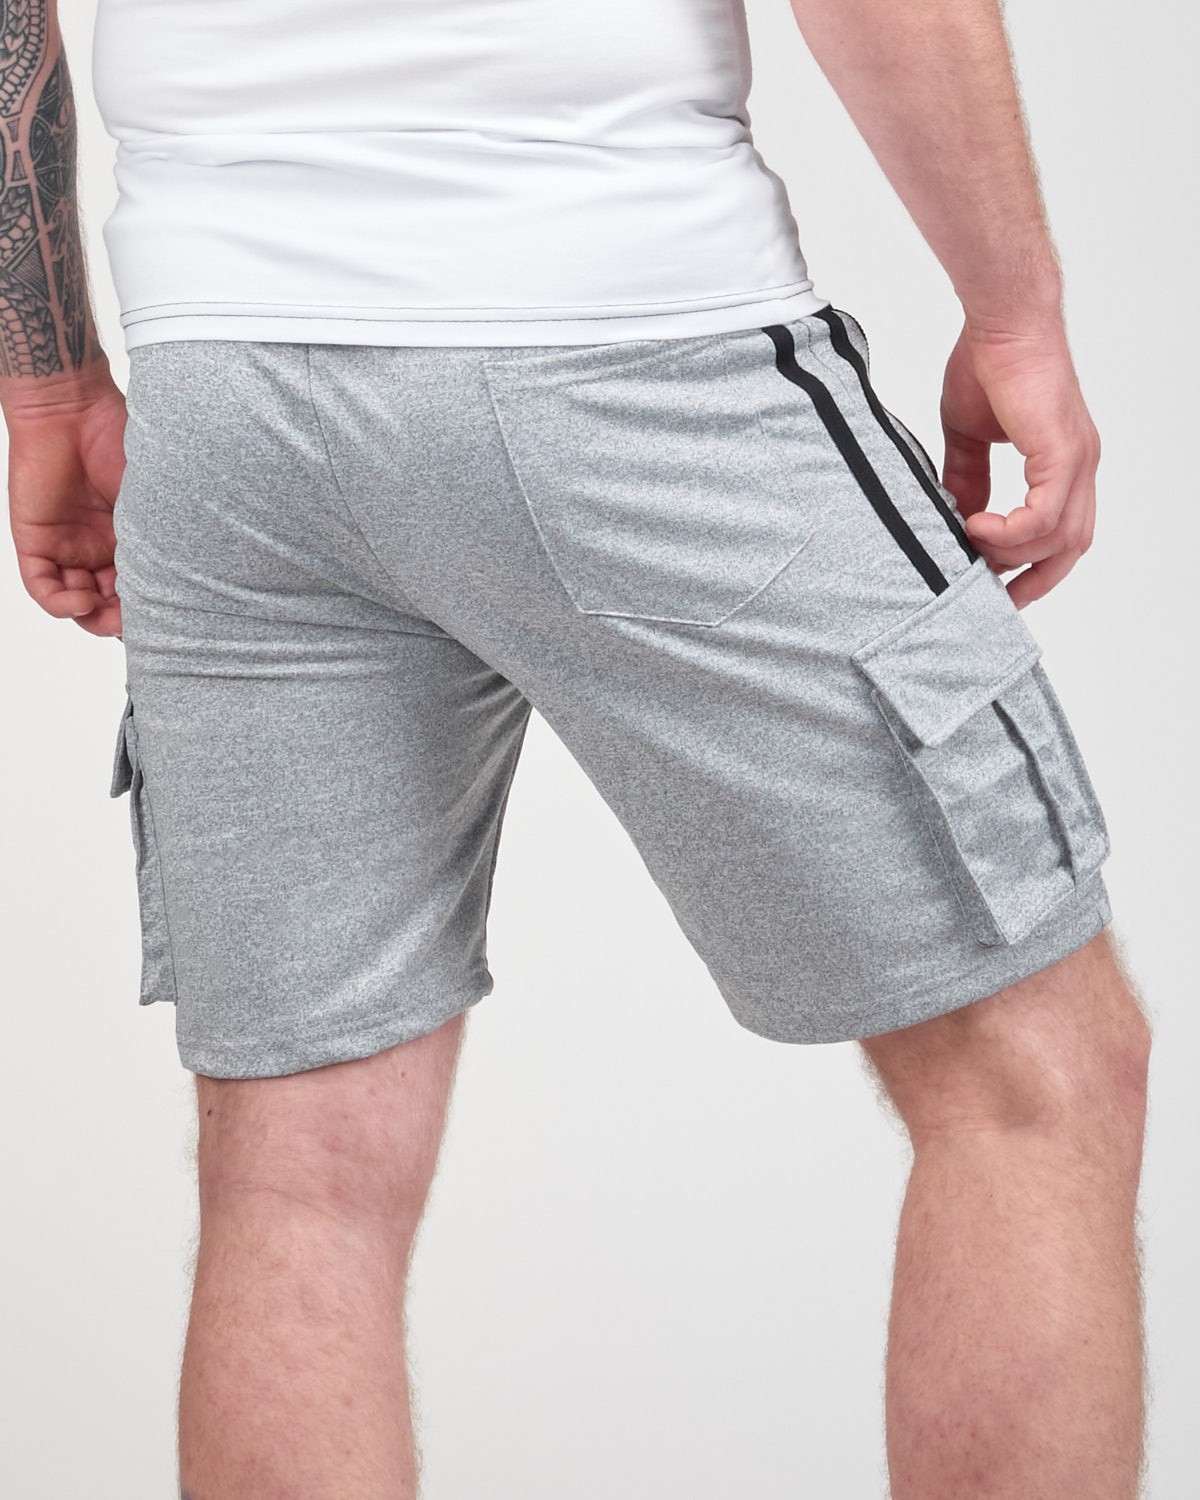 SPORT IS YOUR GANG Shorts Silver